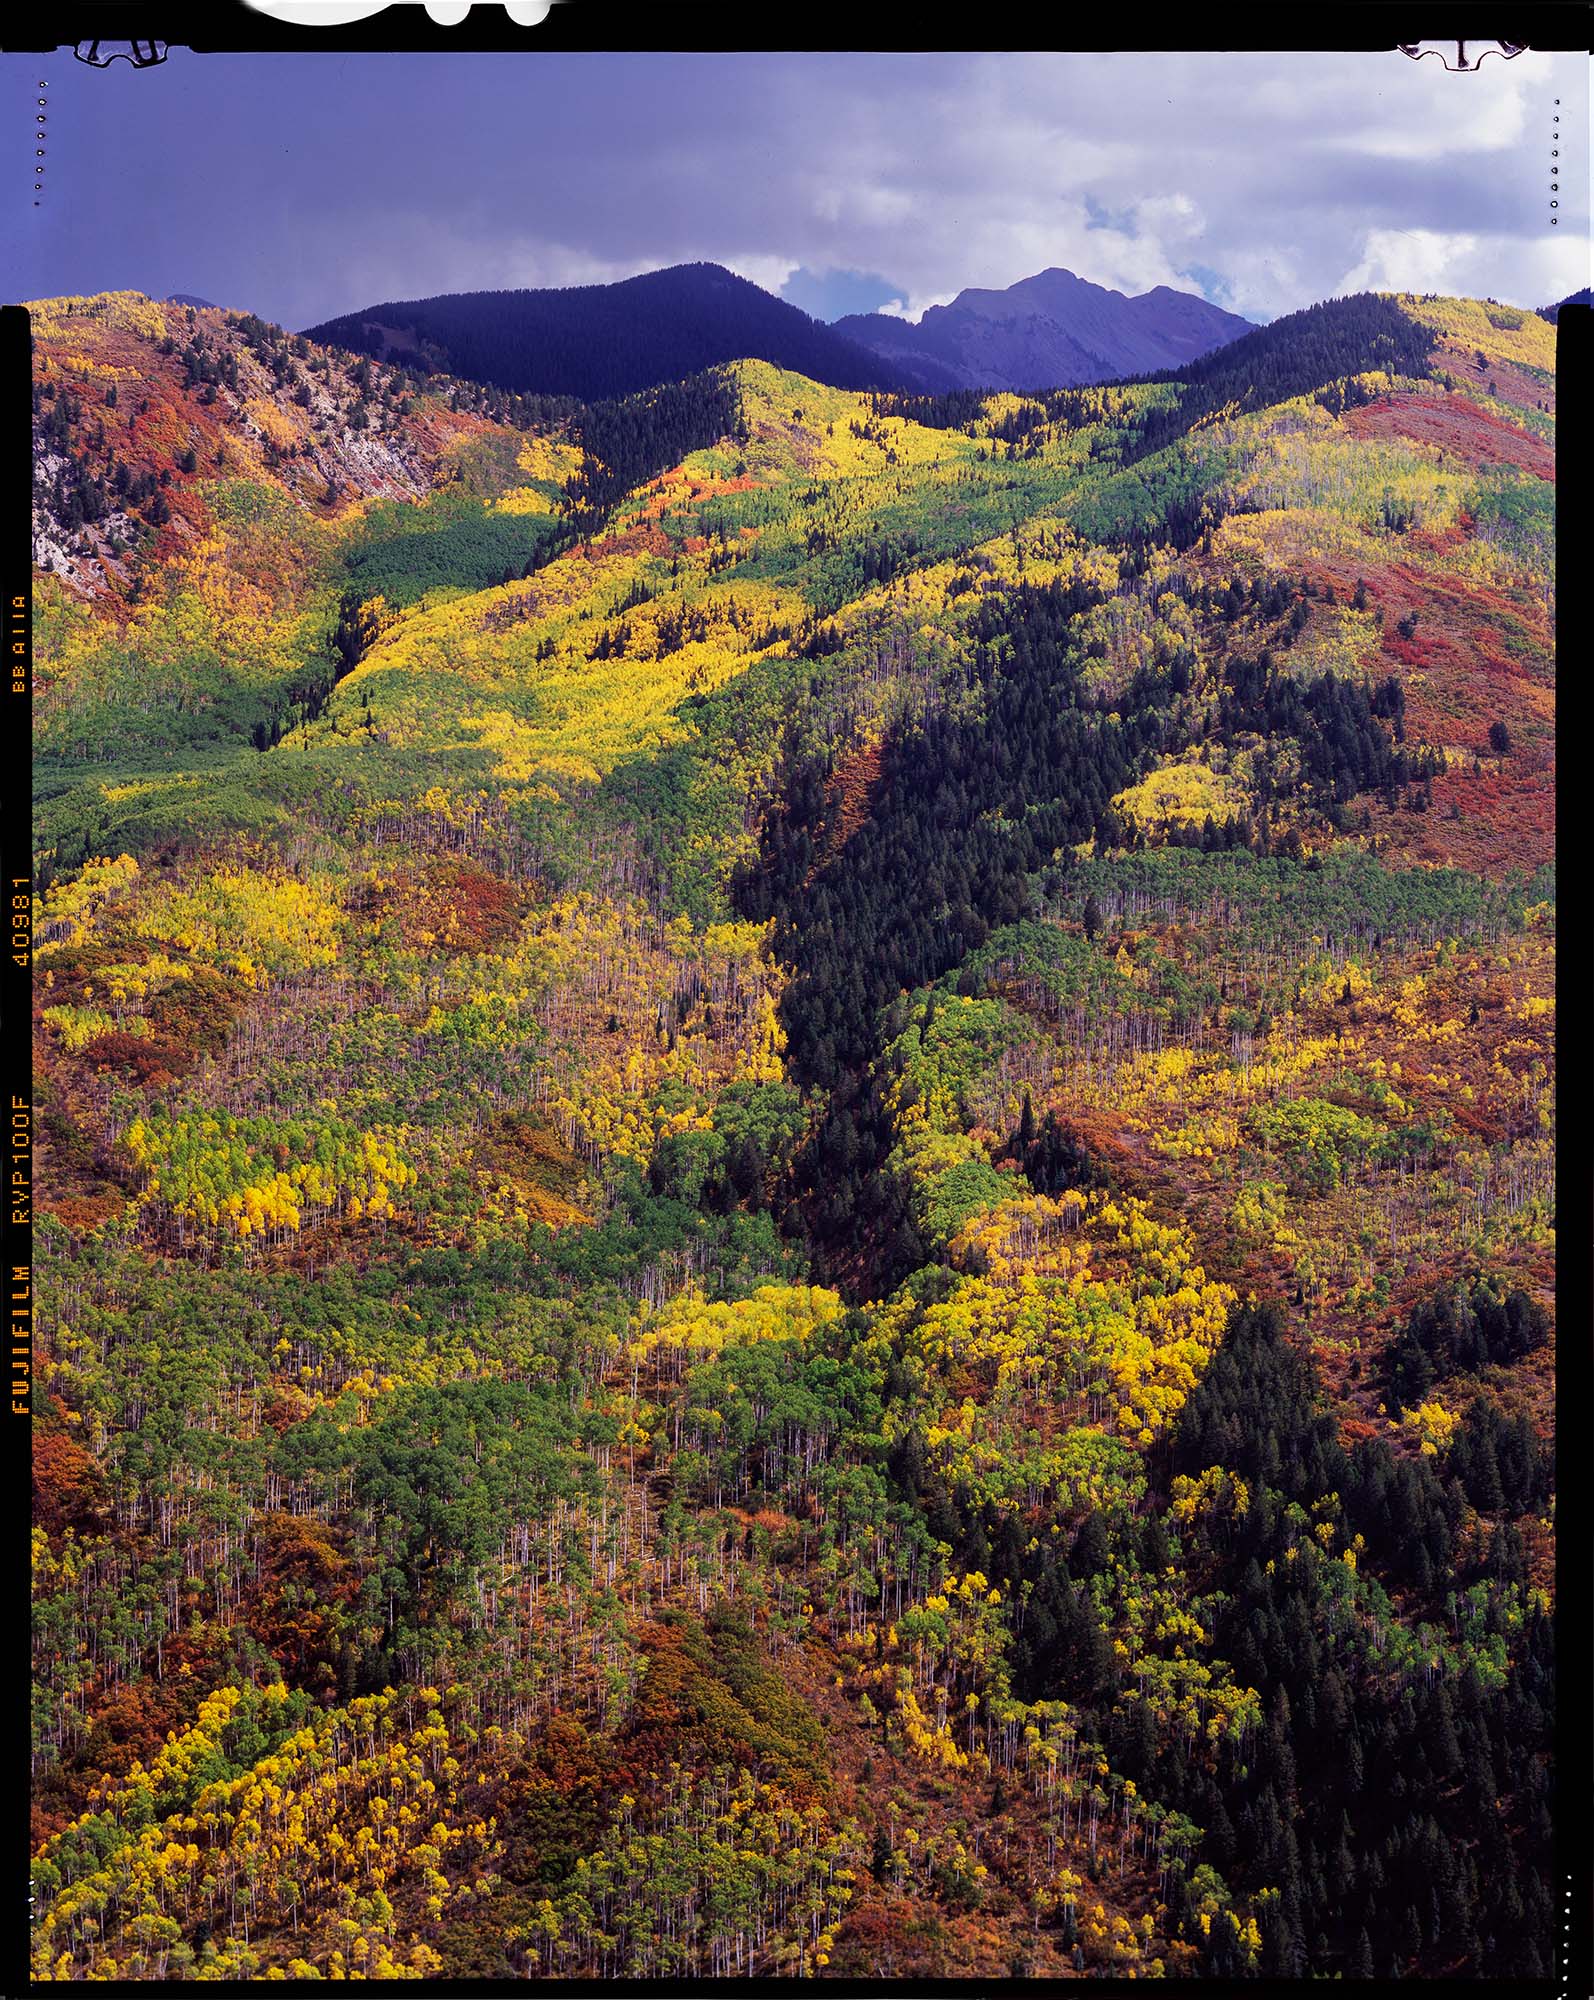 This image does a great job of showing the key differences of viewing fall colors in Colorado vs back in New England.  We do...